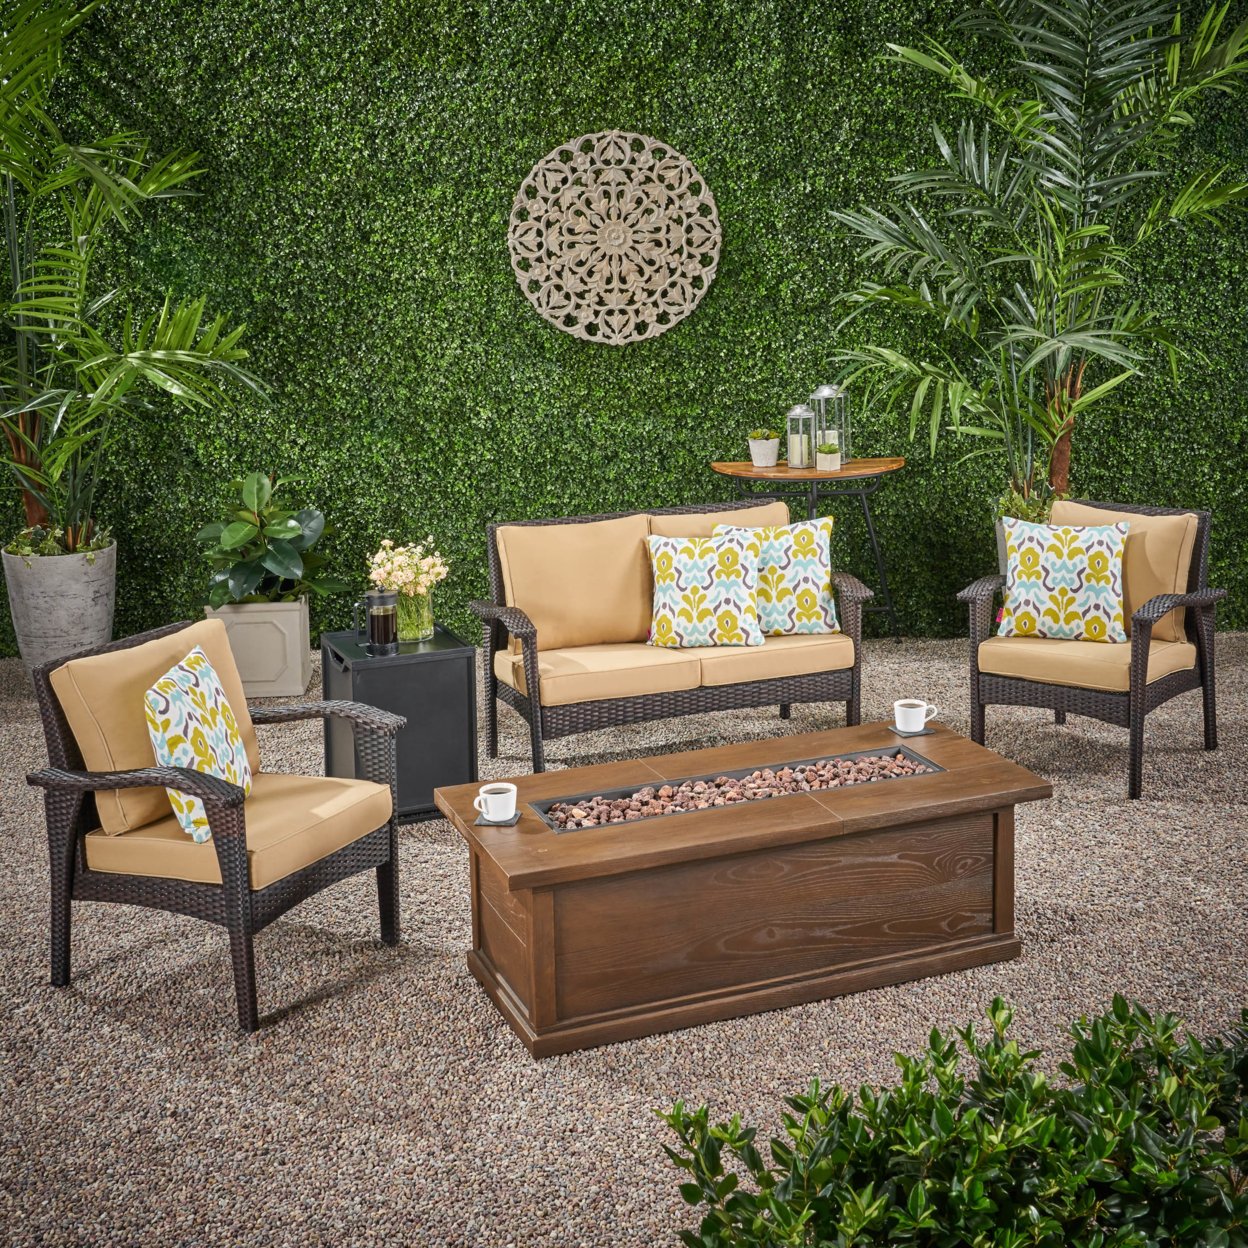 Eleanore Outdoor 4 Seater Wicker Chat Set With Fire Pit - Brown + Tan + Black